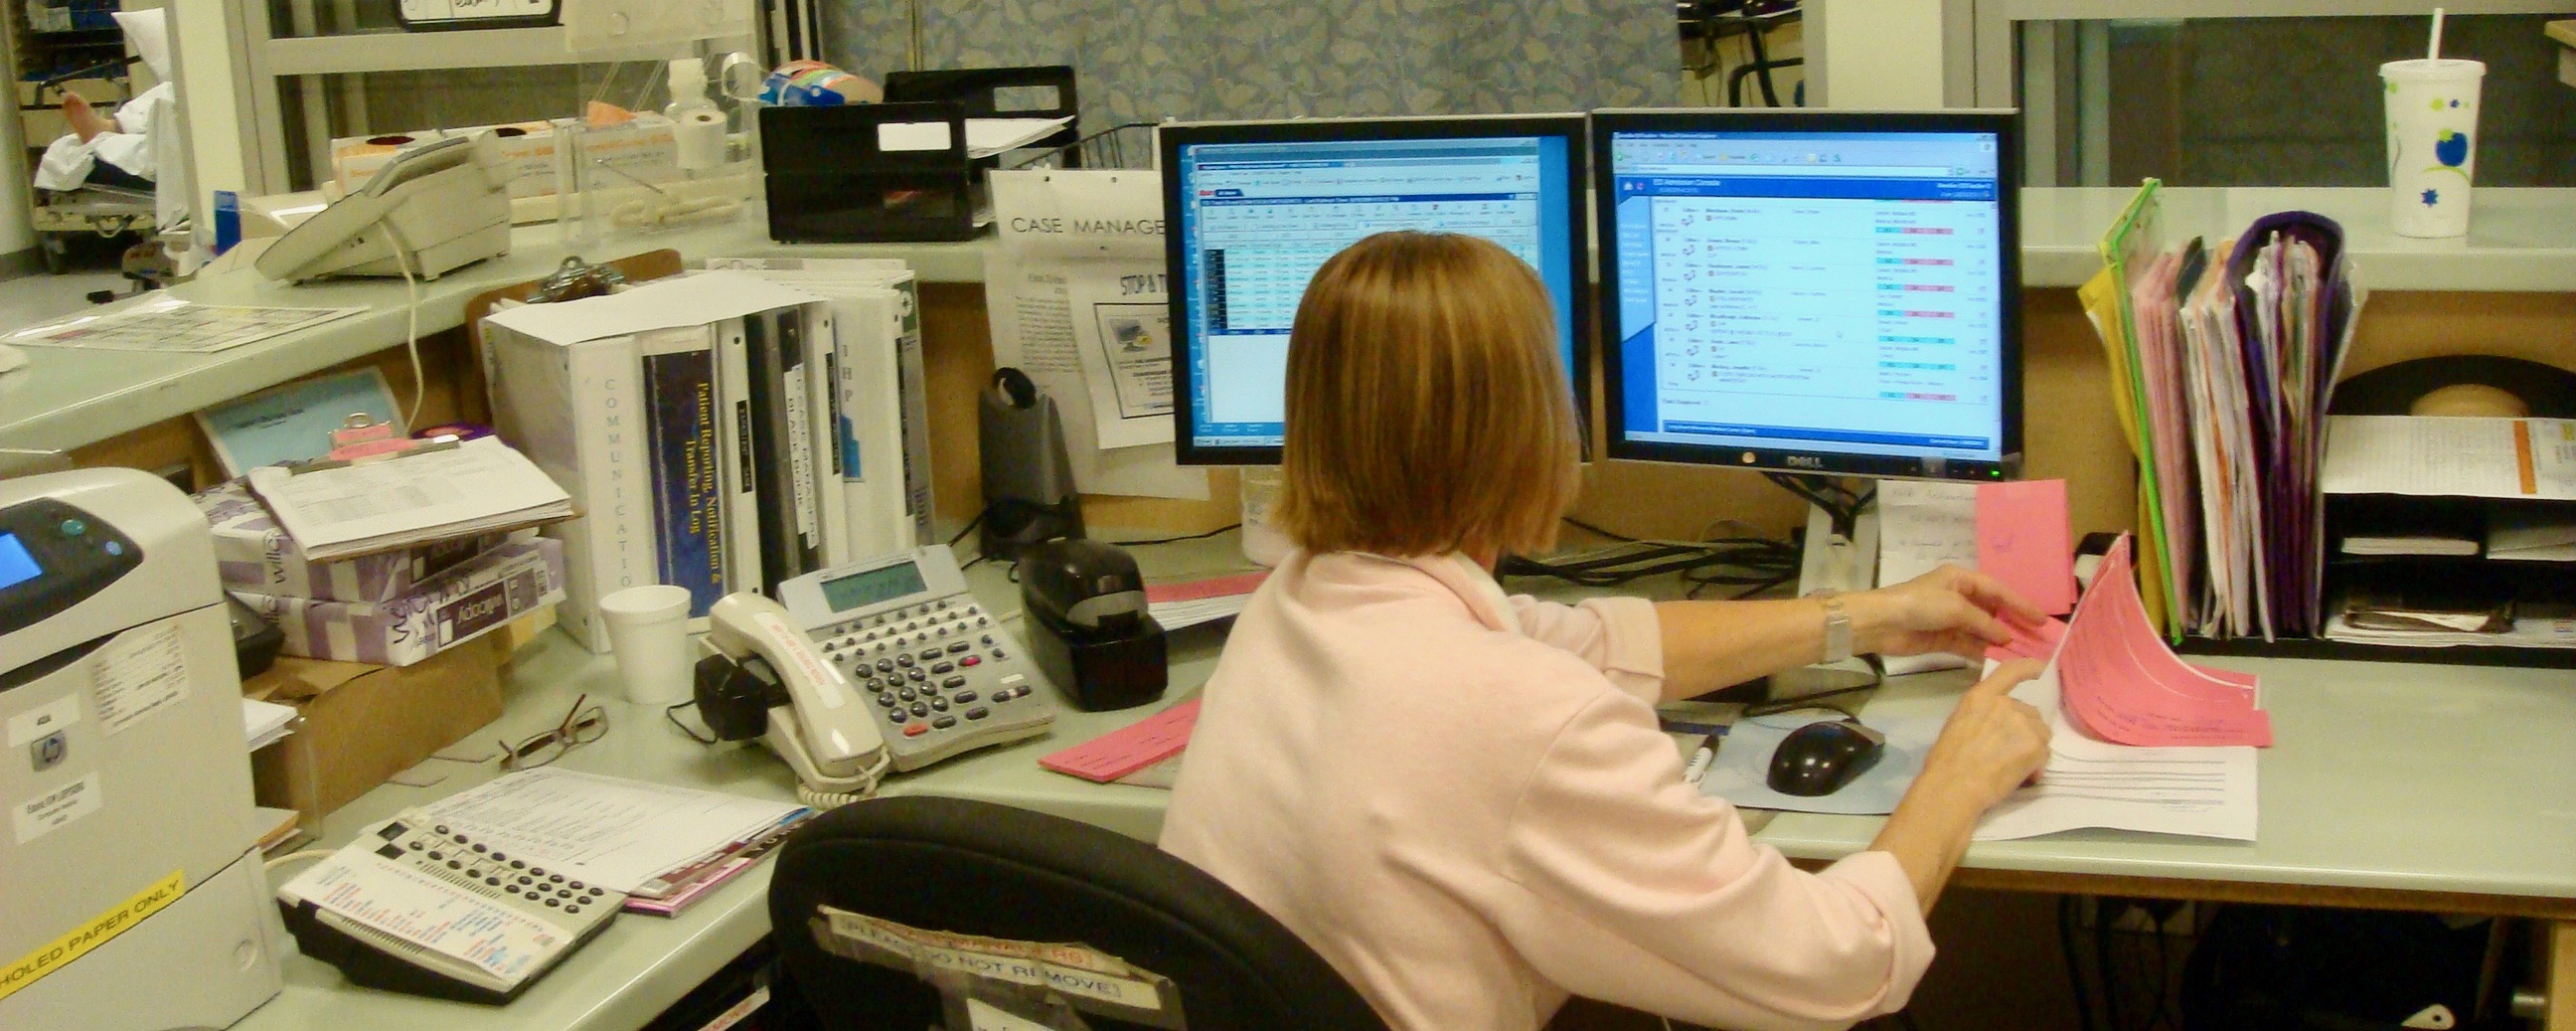 A case worker sits at an emergency department desk cluttered with many artifacts, including paper, desktop displays, and a telephone.